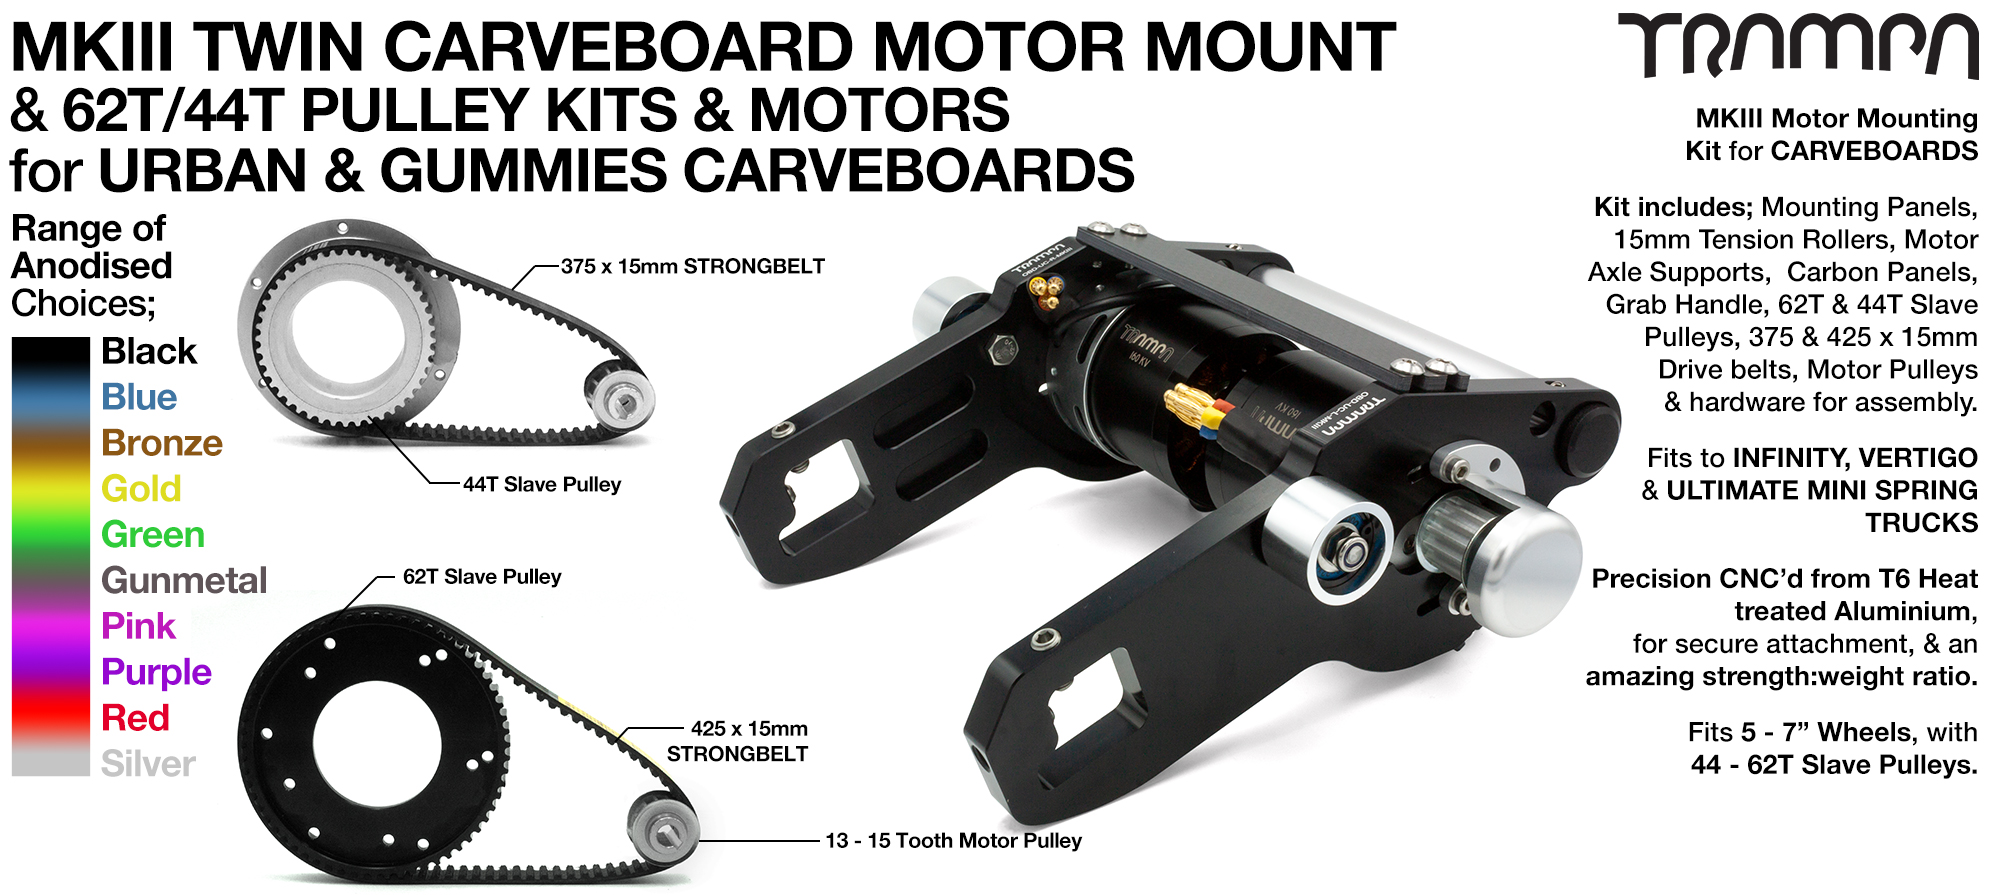 MkIII 2in1 CARVEBOARD Motormount with 44 tooth GUMMY & 62 tooth URBAN Pulleys & TRAMPA Motor - TWIN